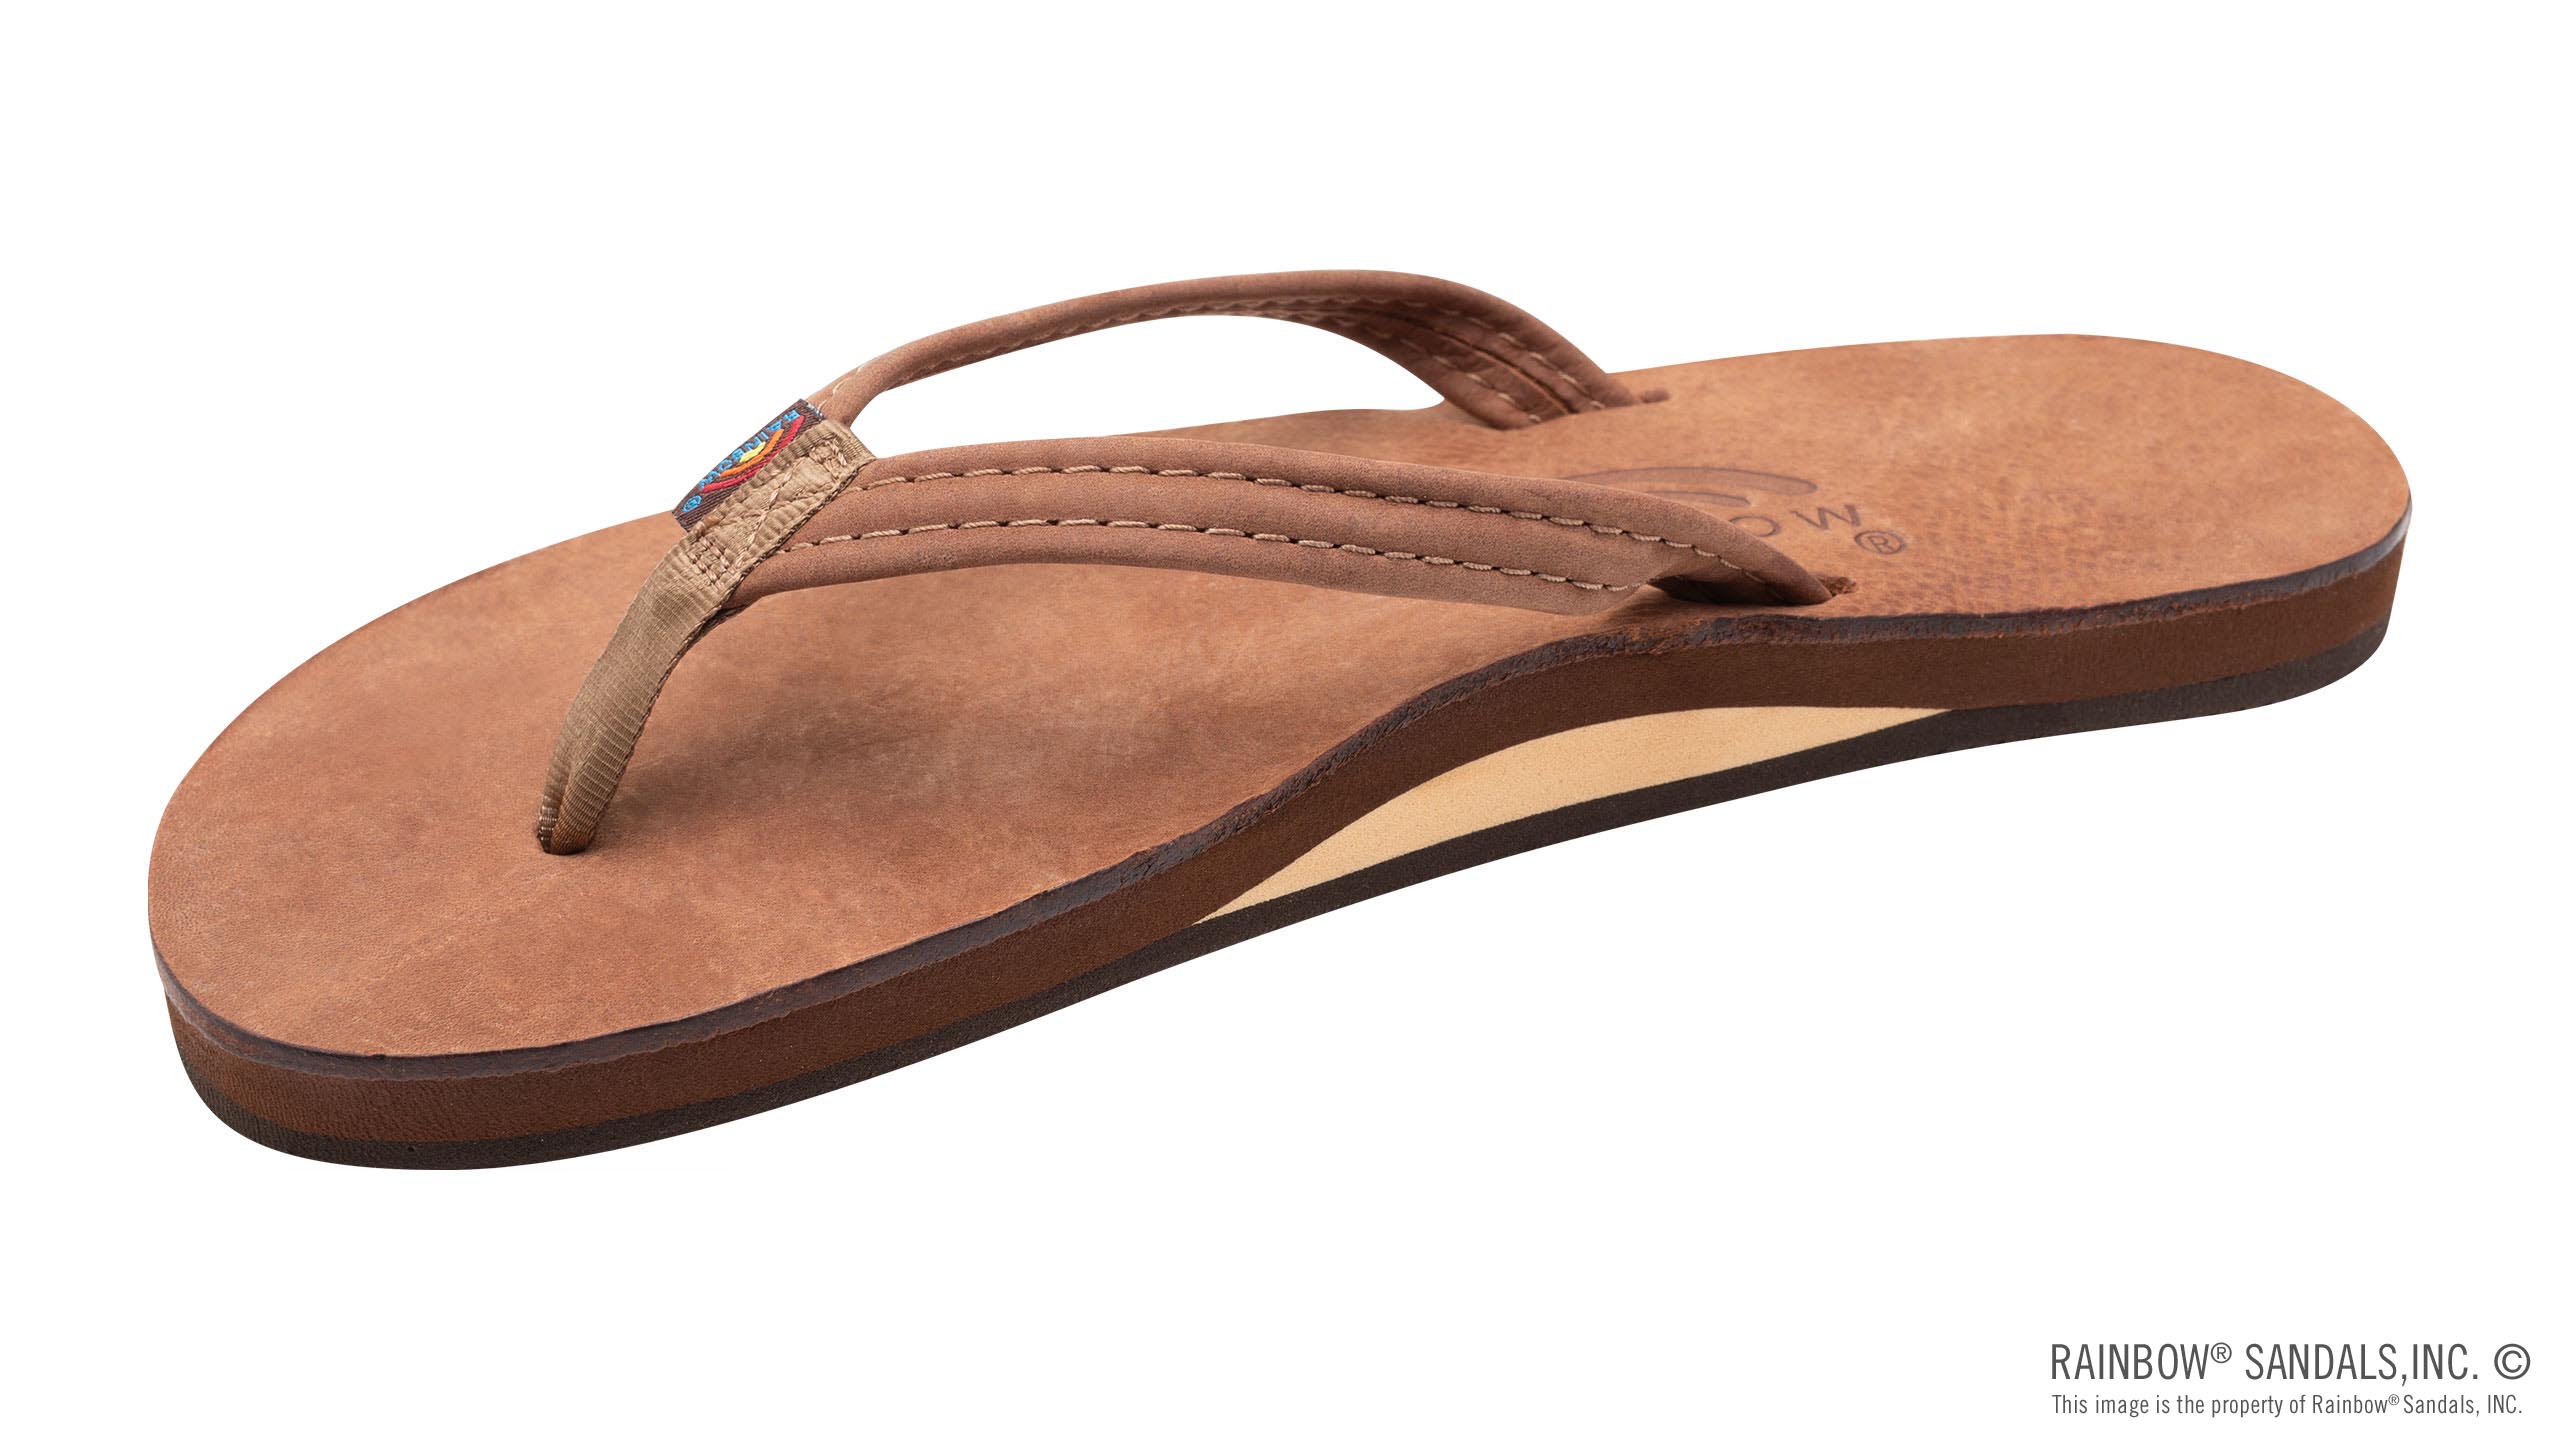  Rainbow Sandals Womens Luxury Leather - Double Layer Arch  Support with 1/2 Narrow Straps, Buckskin, Womens size S / 5.5-6.5